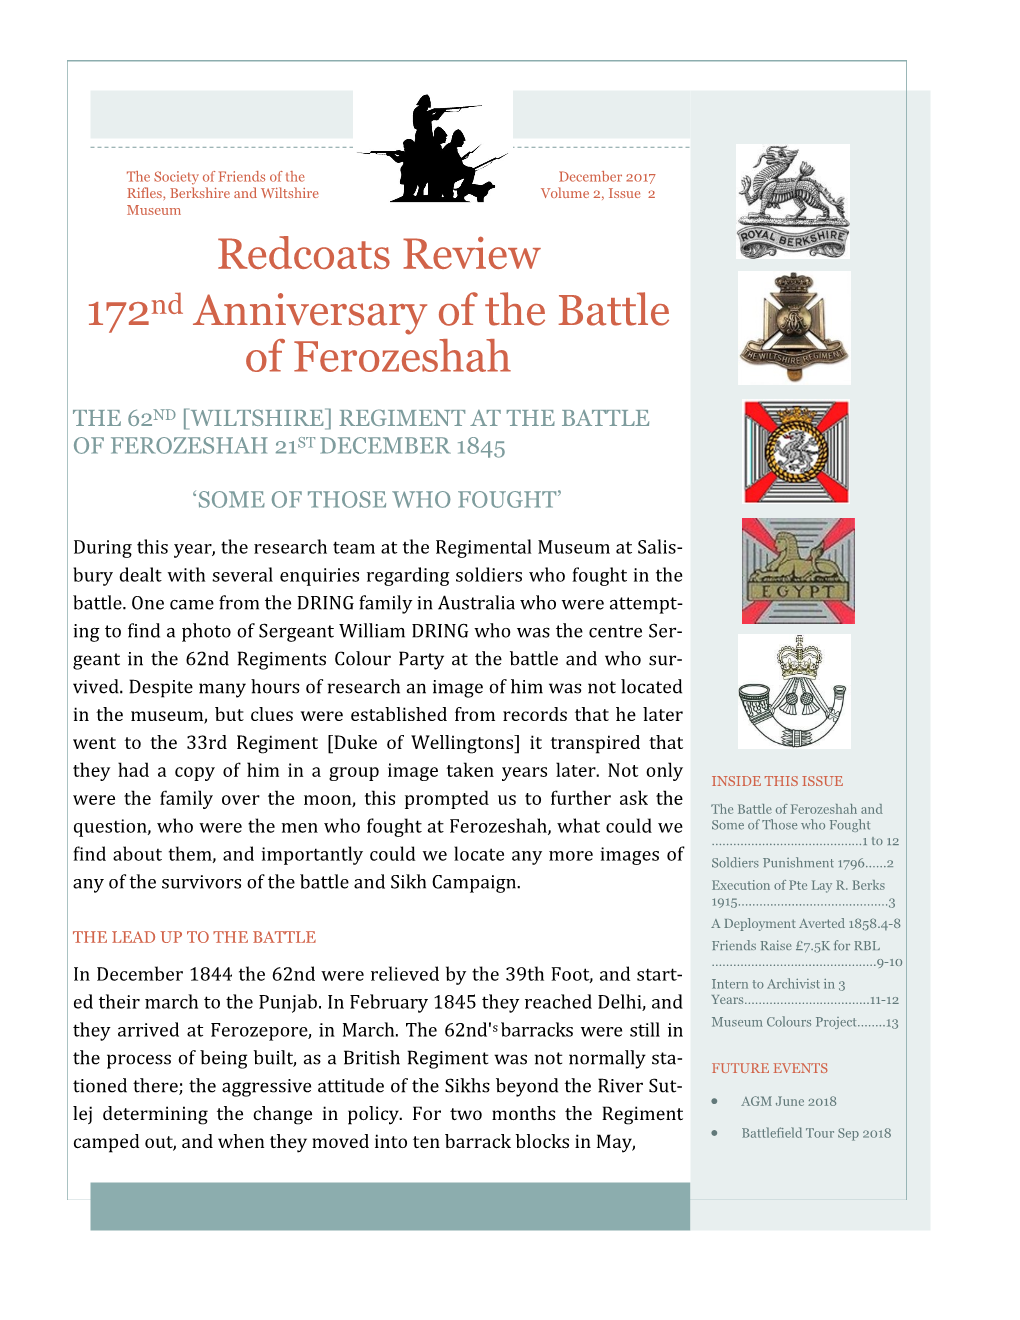 Redcoats Review 172Nd Anniversary of the Battle of Ferozeshah